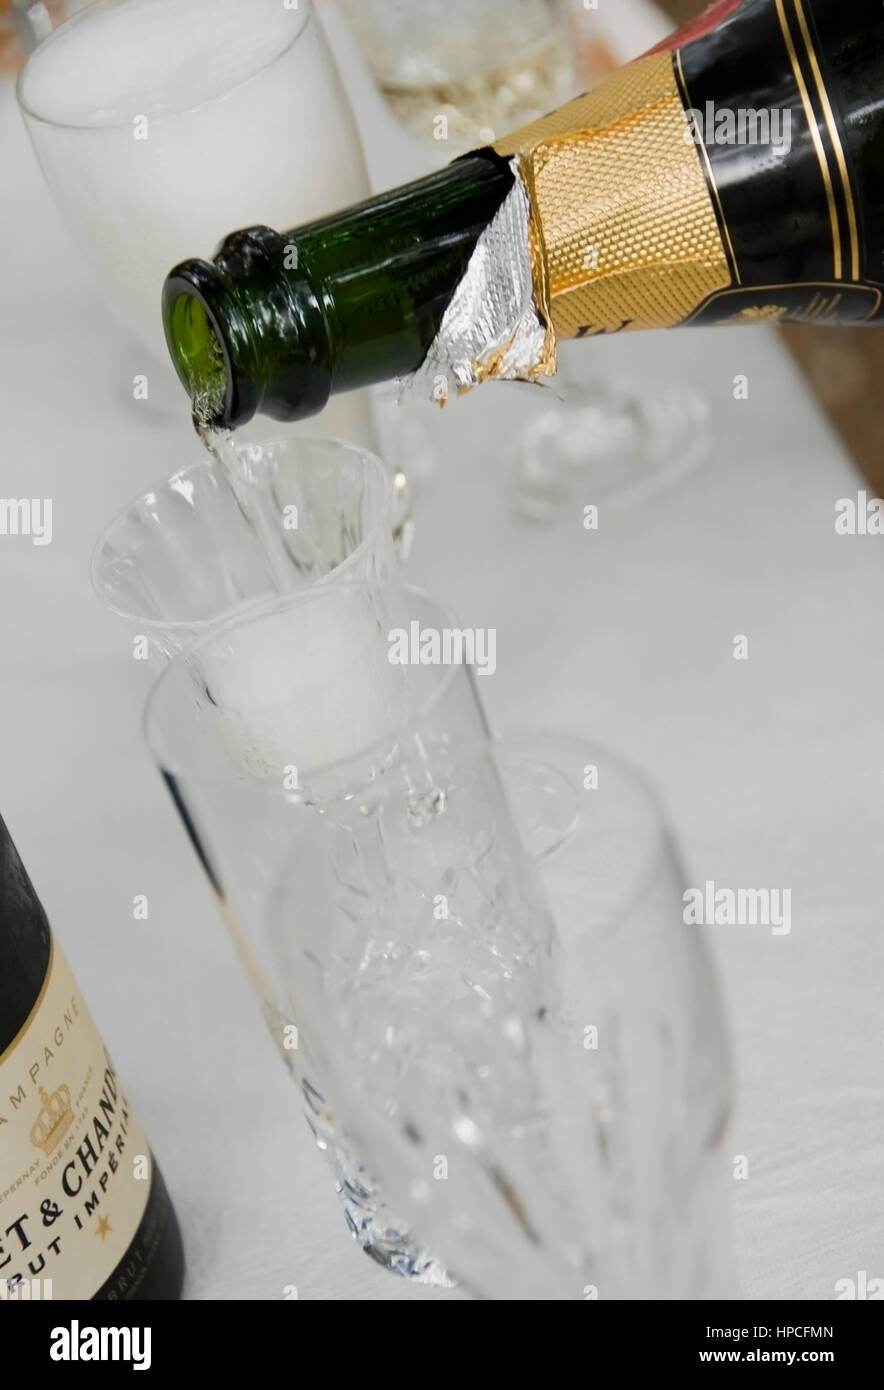 Champagner einschenken - pours out champagne Stock Photo